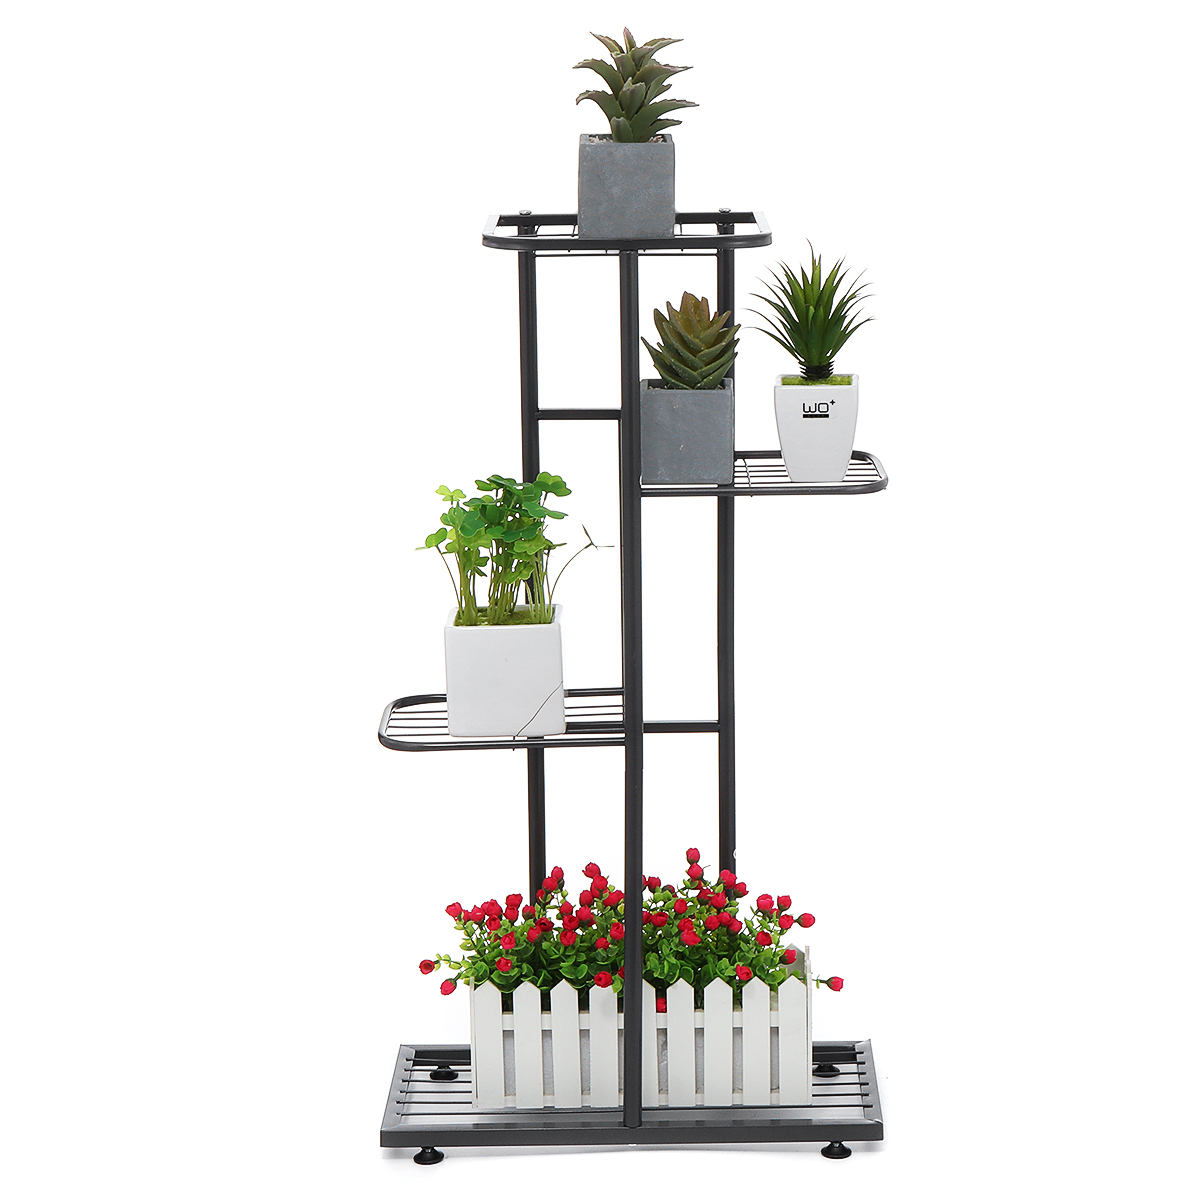 4-Layers-Retro-Iron-Flower-Stand-Pot-Plant-Display-Shelves-Garden-Home-Decoration-1720861-5